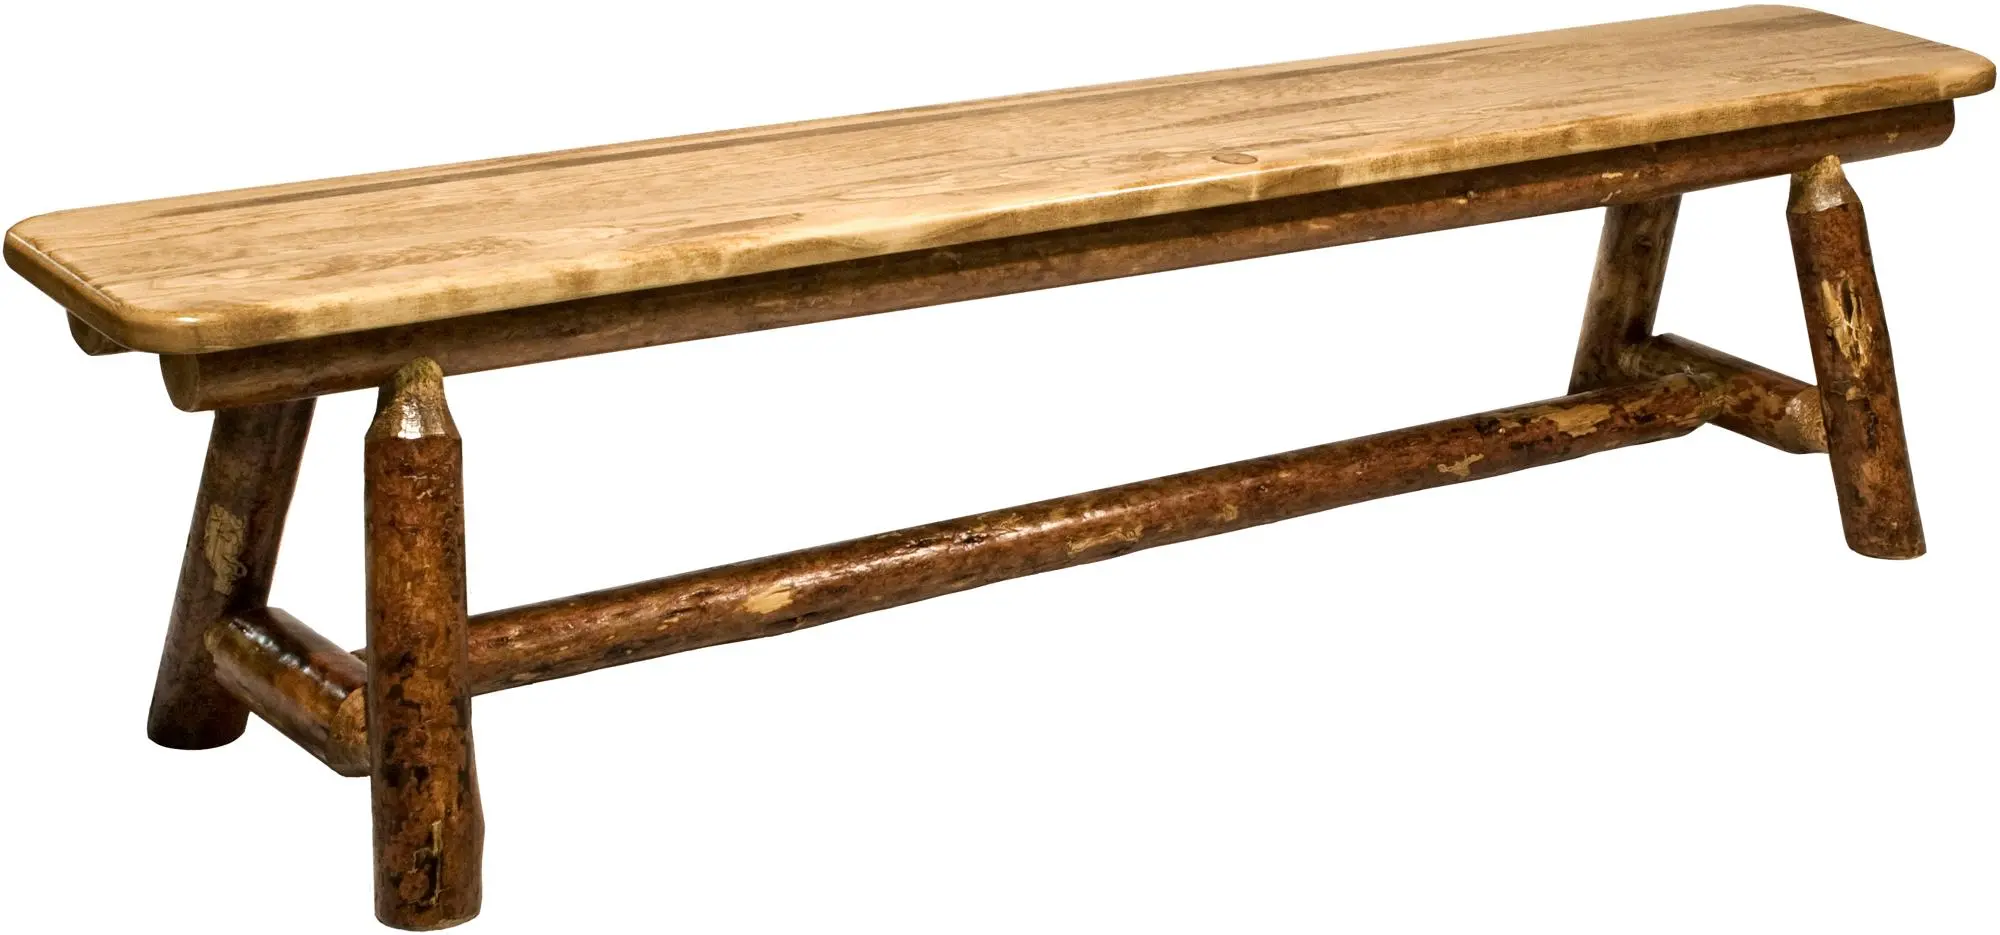 Glacier Country Plank Style Bench (6 Foot)